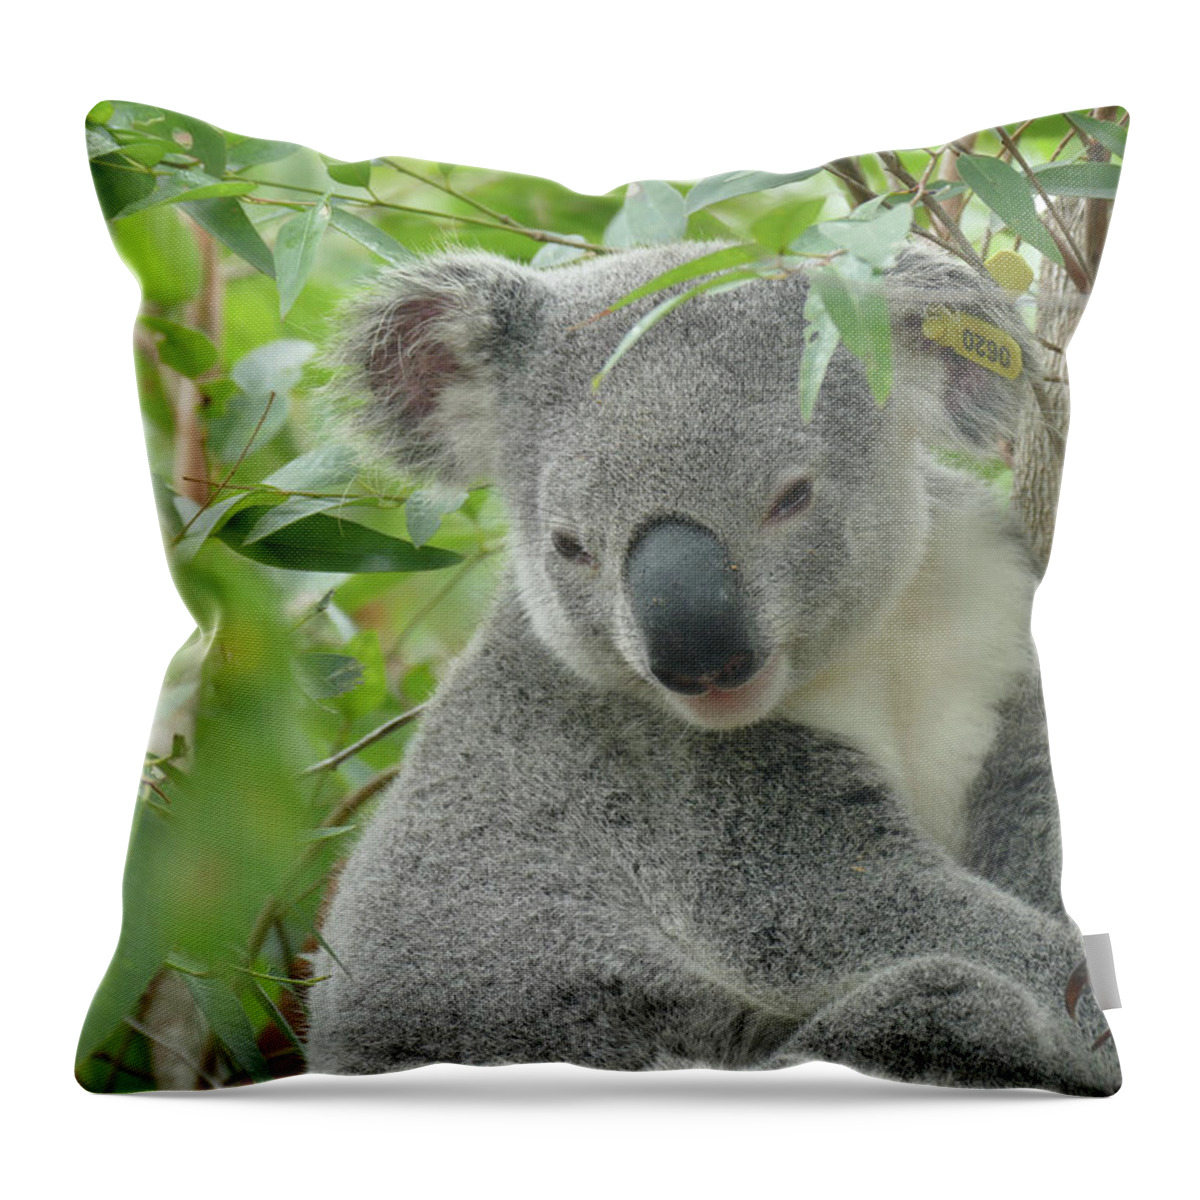 Animals Throw Pillow featuring the photograph Look After Me Please by Maryse Jansen